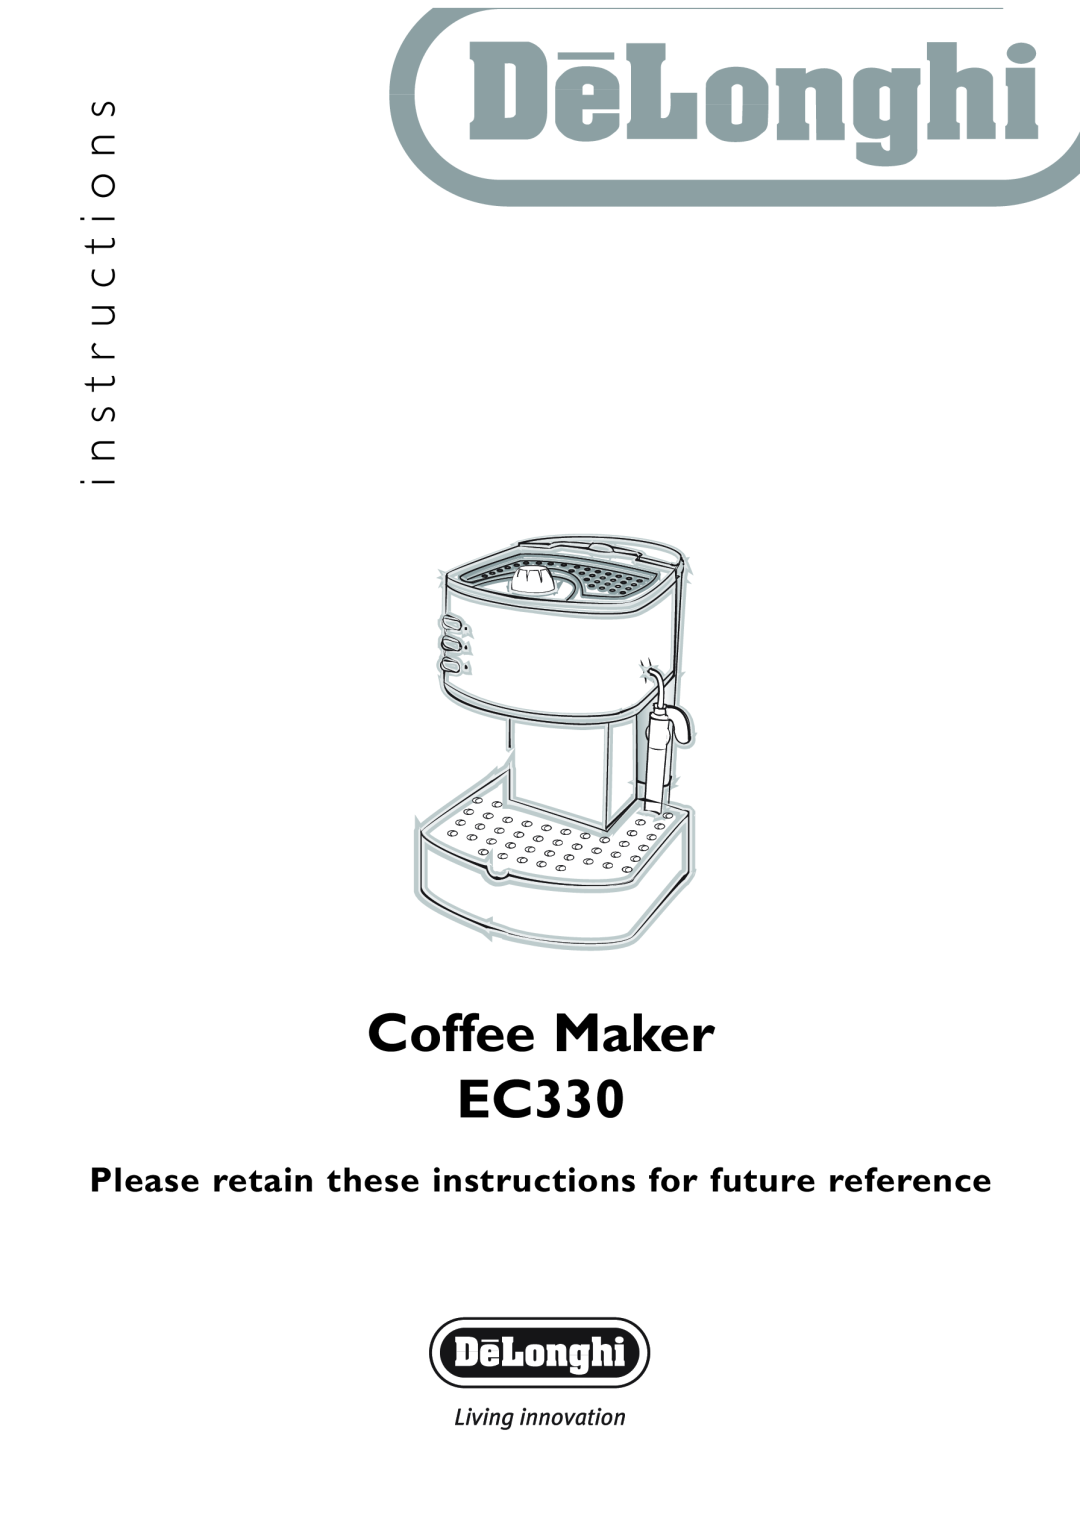 DeLonghi manual Coffee Maker EC330, i n s t r u c t i o n s, Please retain these instructions for future reference 